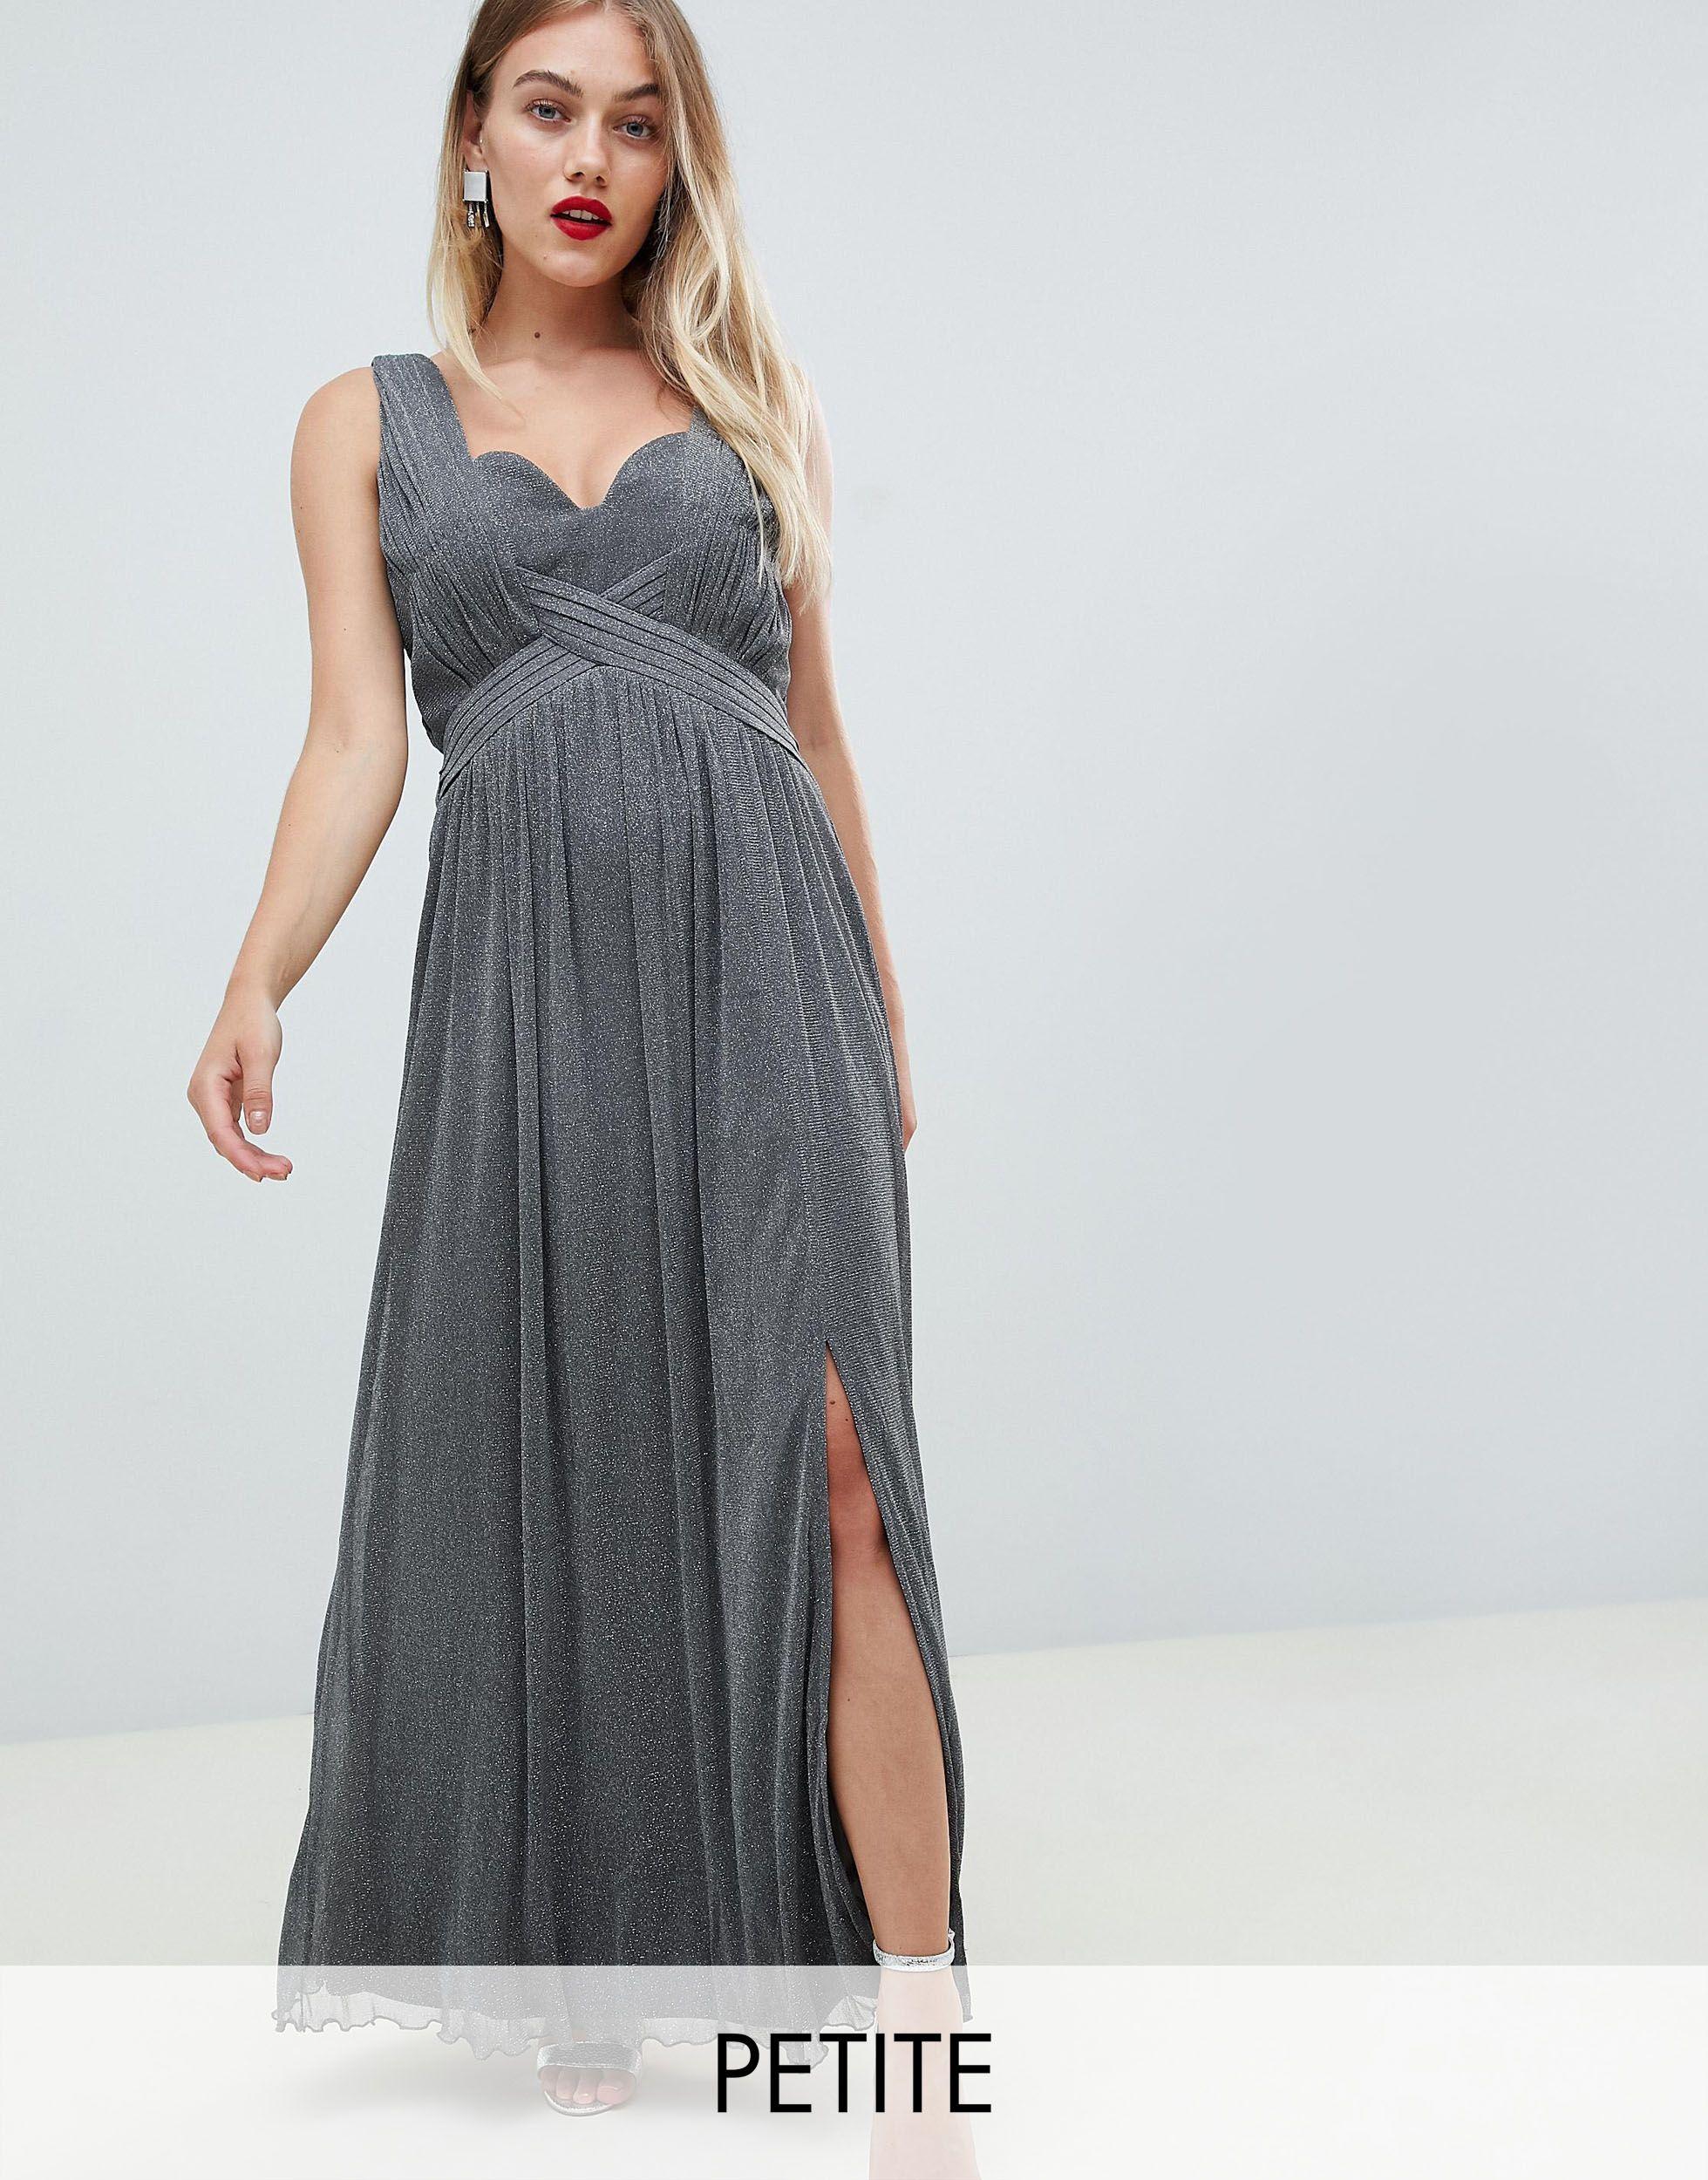 A dress perfect for all occasions! | Bridesmaid dresses 